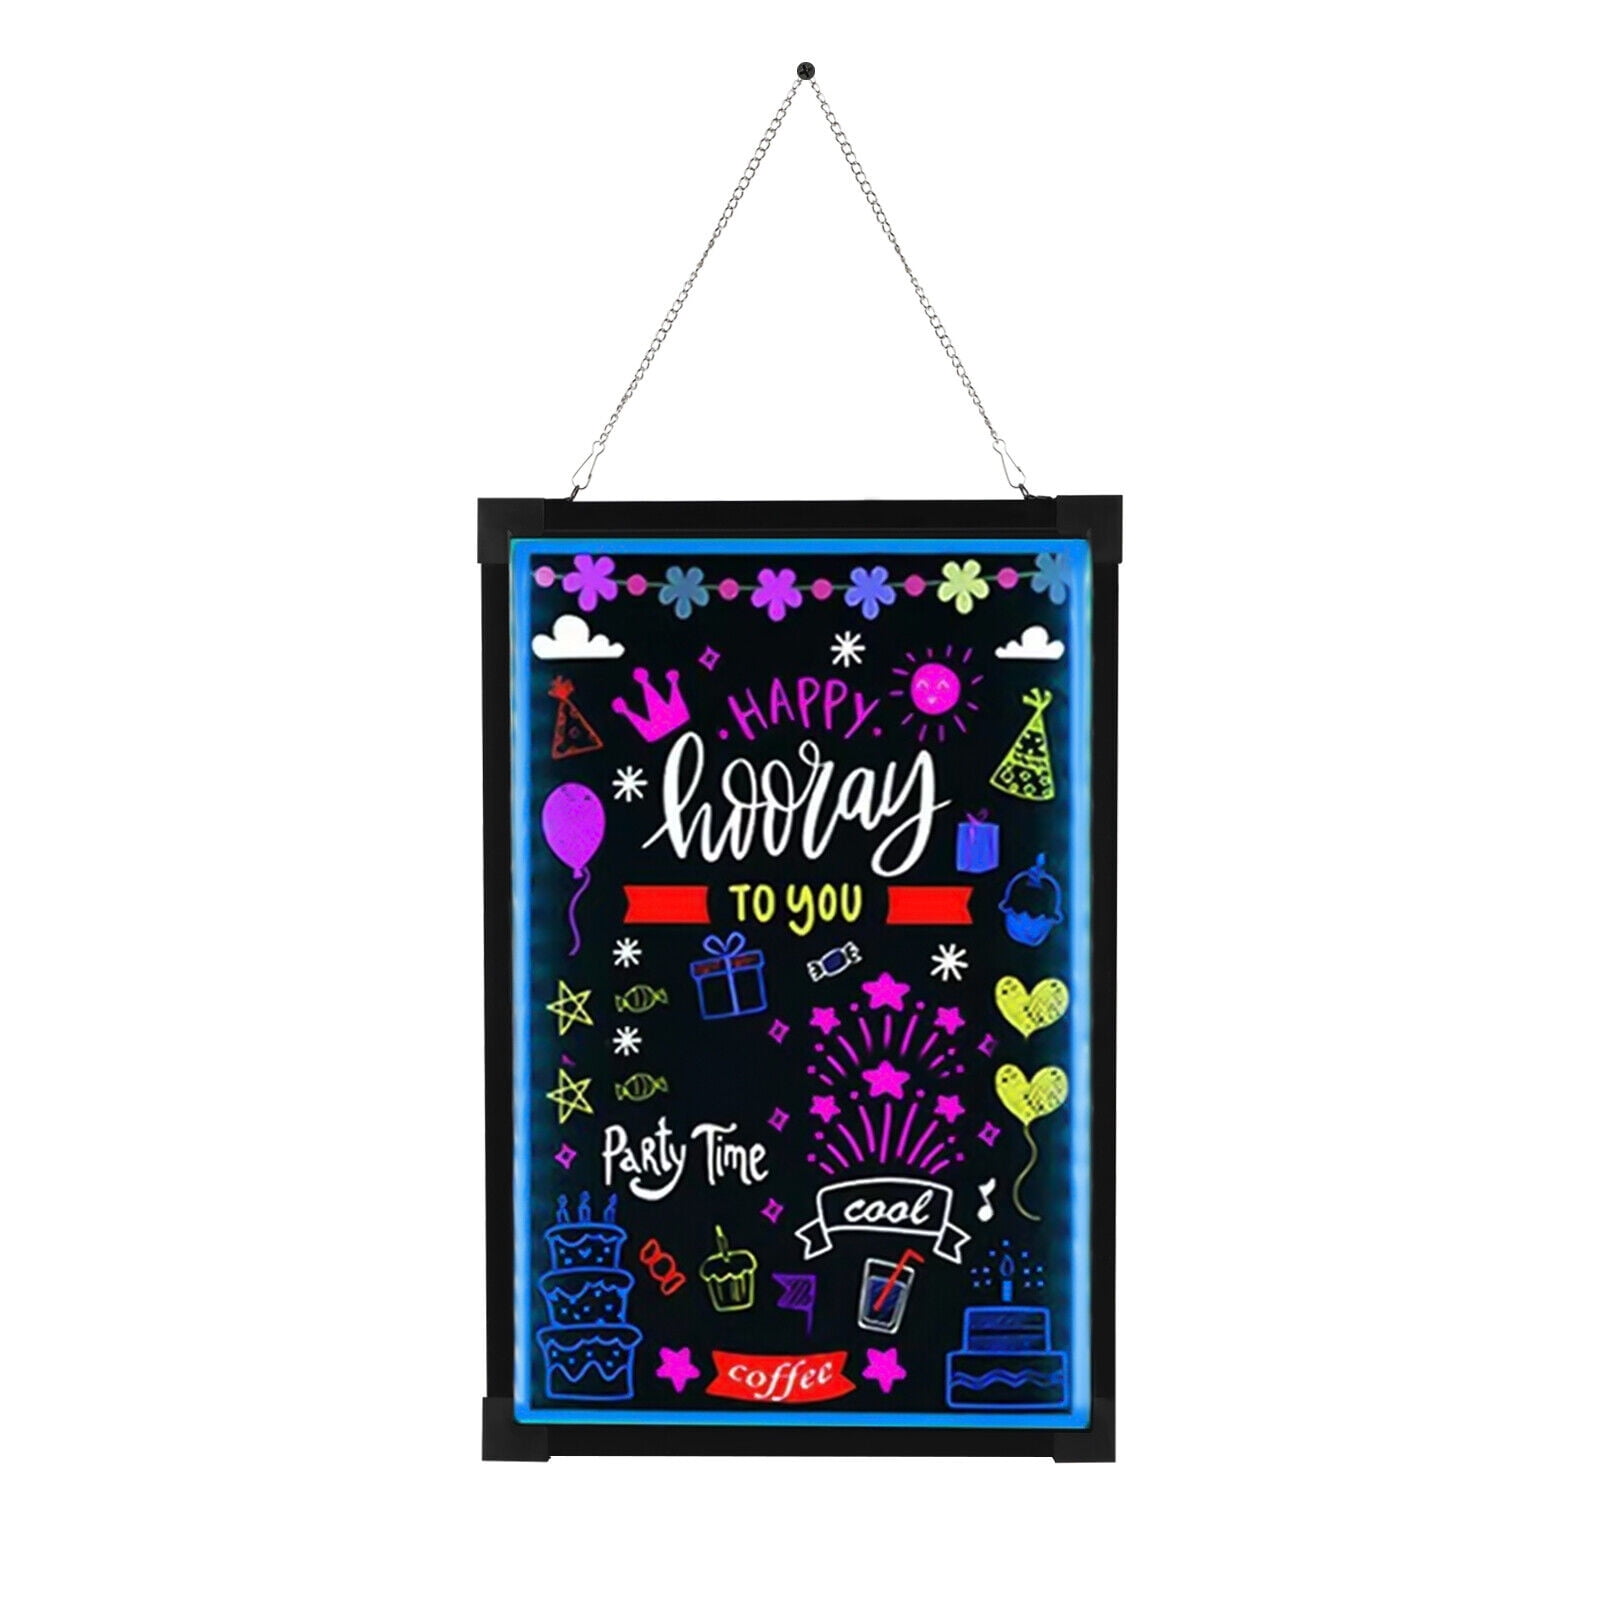  BORWART LED Drawing Chalk Board: Large Single Sided Glass Neon  Sign with Stand - Wooden Message Chalkboard Display with 15 Light Colors 4  Flashing Mode for Kids, Restaurant, Bar, Celebration : Office Products